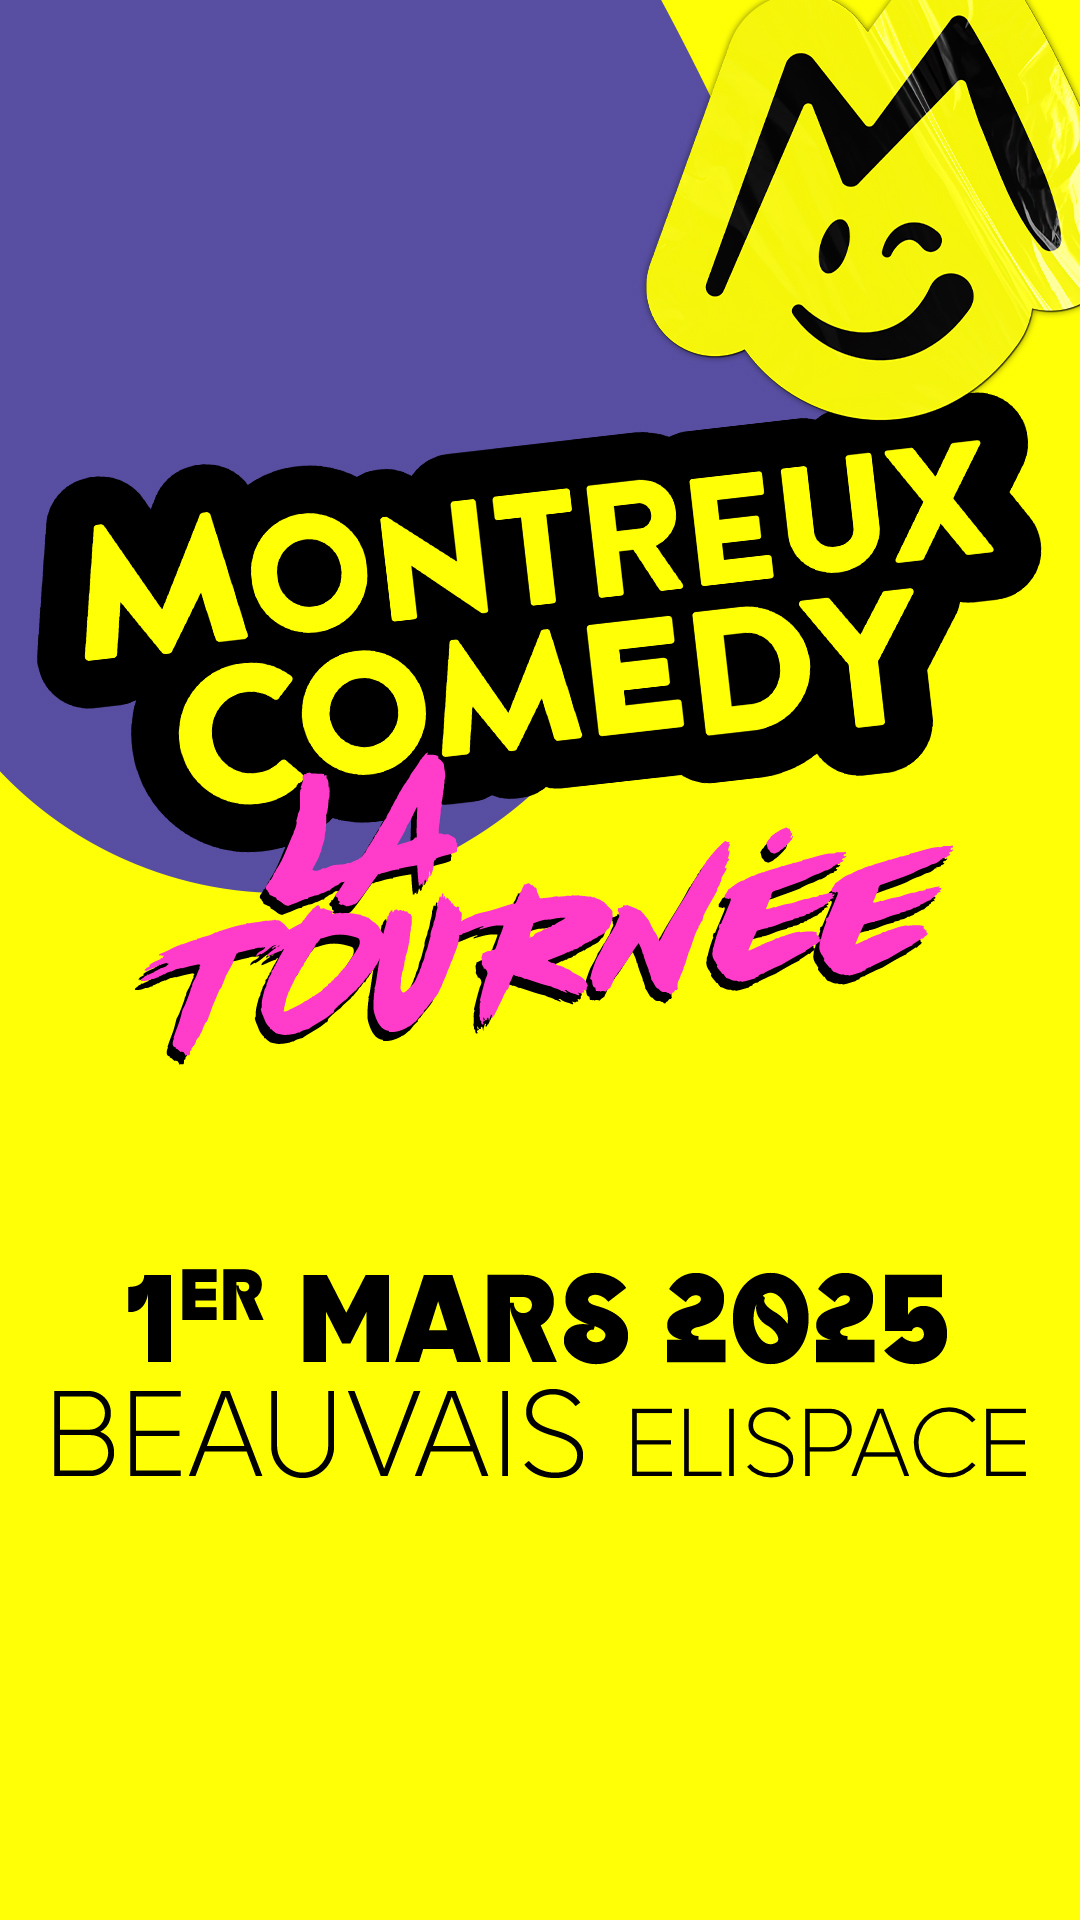 MONTREUX COMEDY 